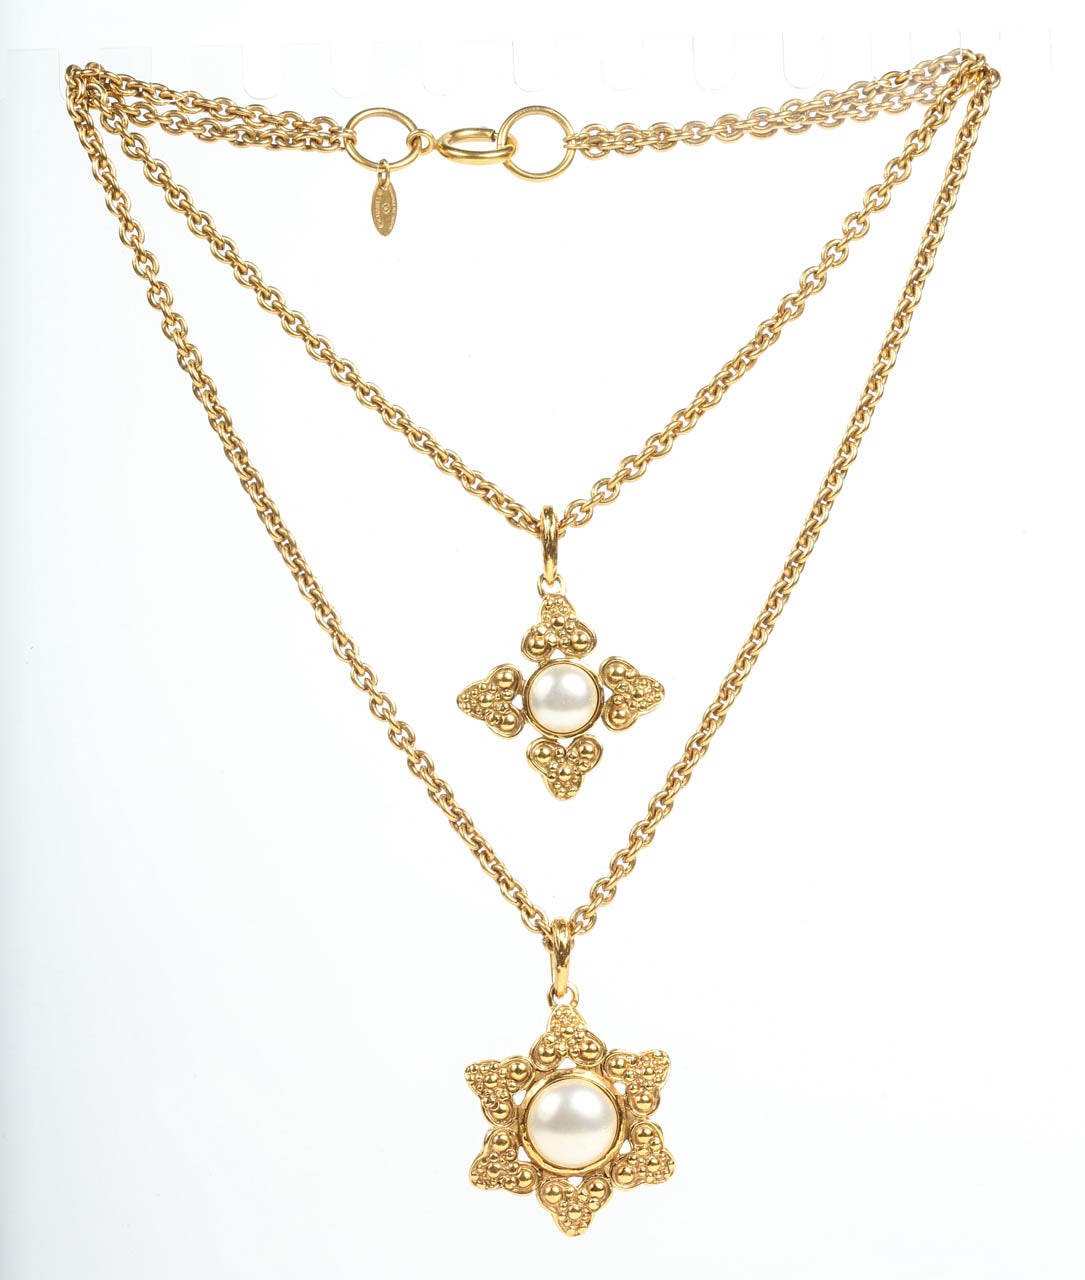 A classic double strand necklace by Chanel featuring two pendants with a bubbled trefoil frame around a glass pearl center. Marked on the back of both pendants and with a hang tag on the chain of the 